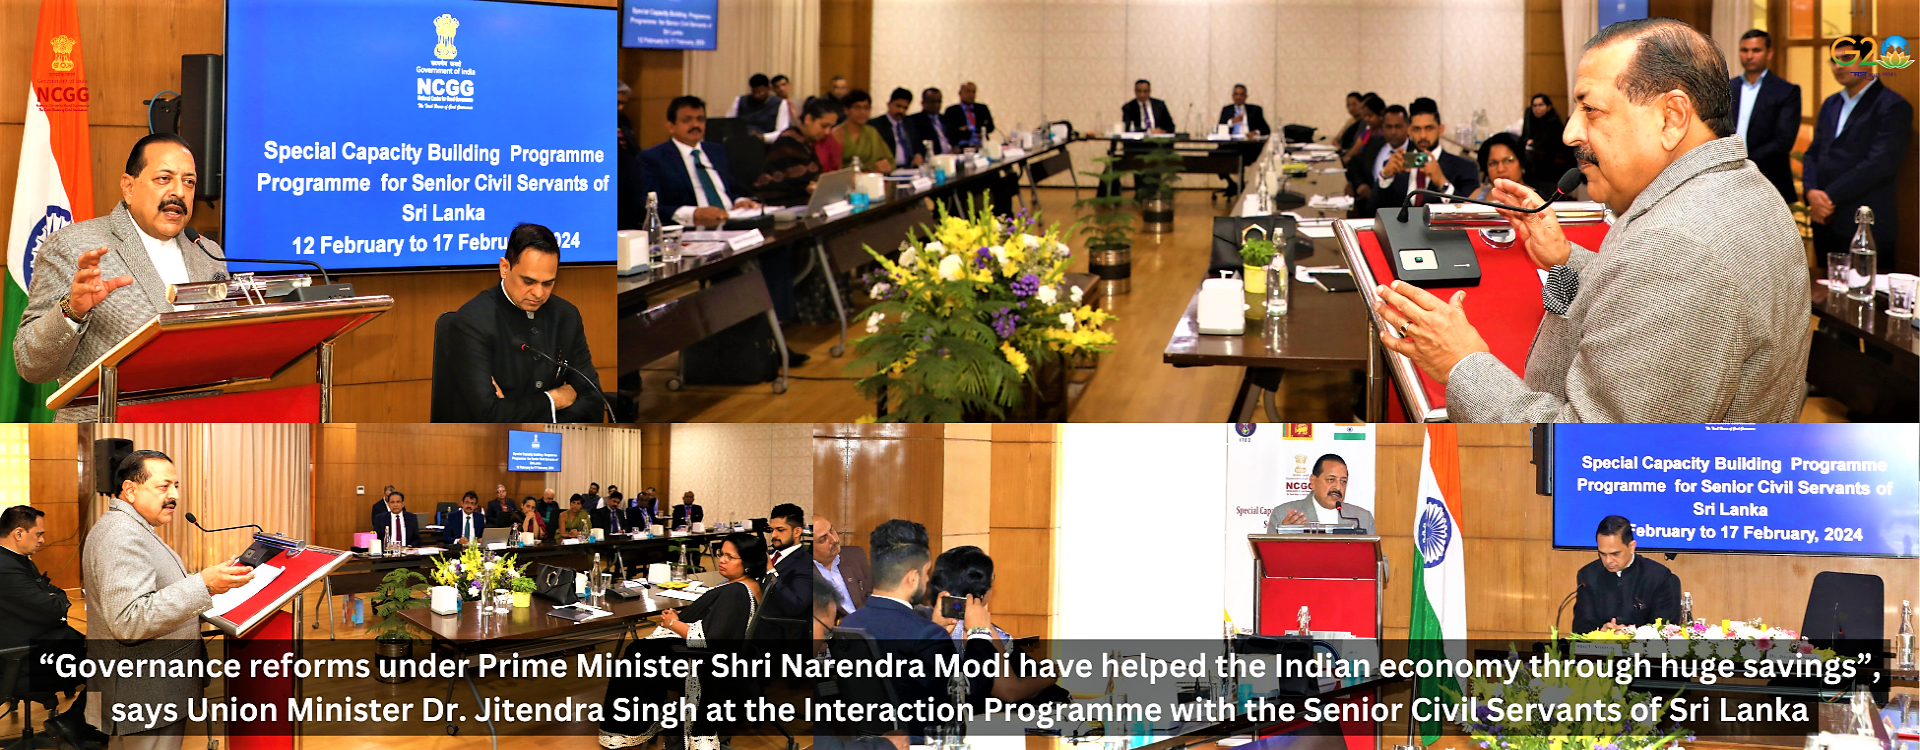 “Governance reforms under Prime Minister Shri Narendra Modi have helped the Indian economy through huge savings”, says Union Minister Dr. Jitendra Singh at the Interaction Programme with the Senior Civil Servants of Sri Lanka